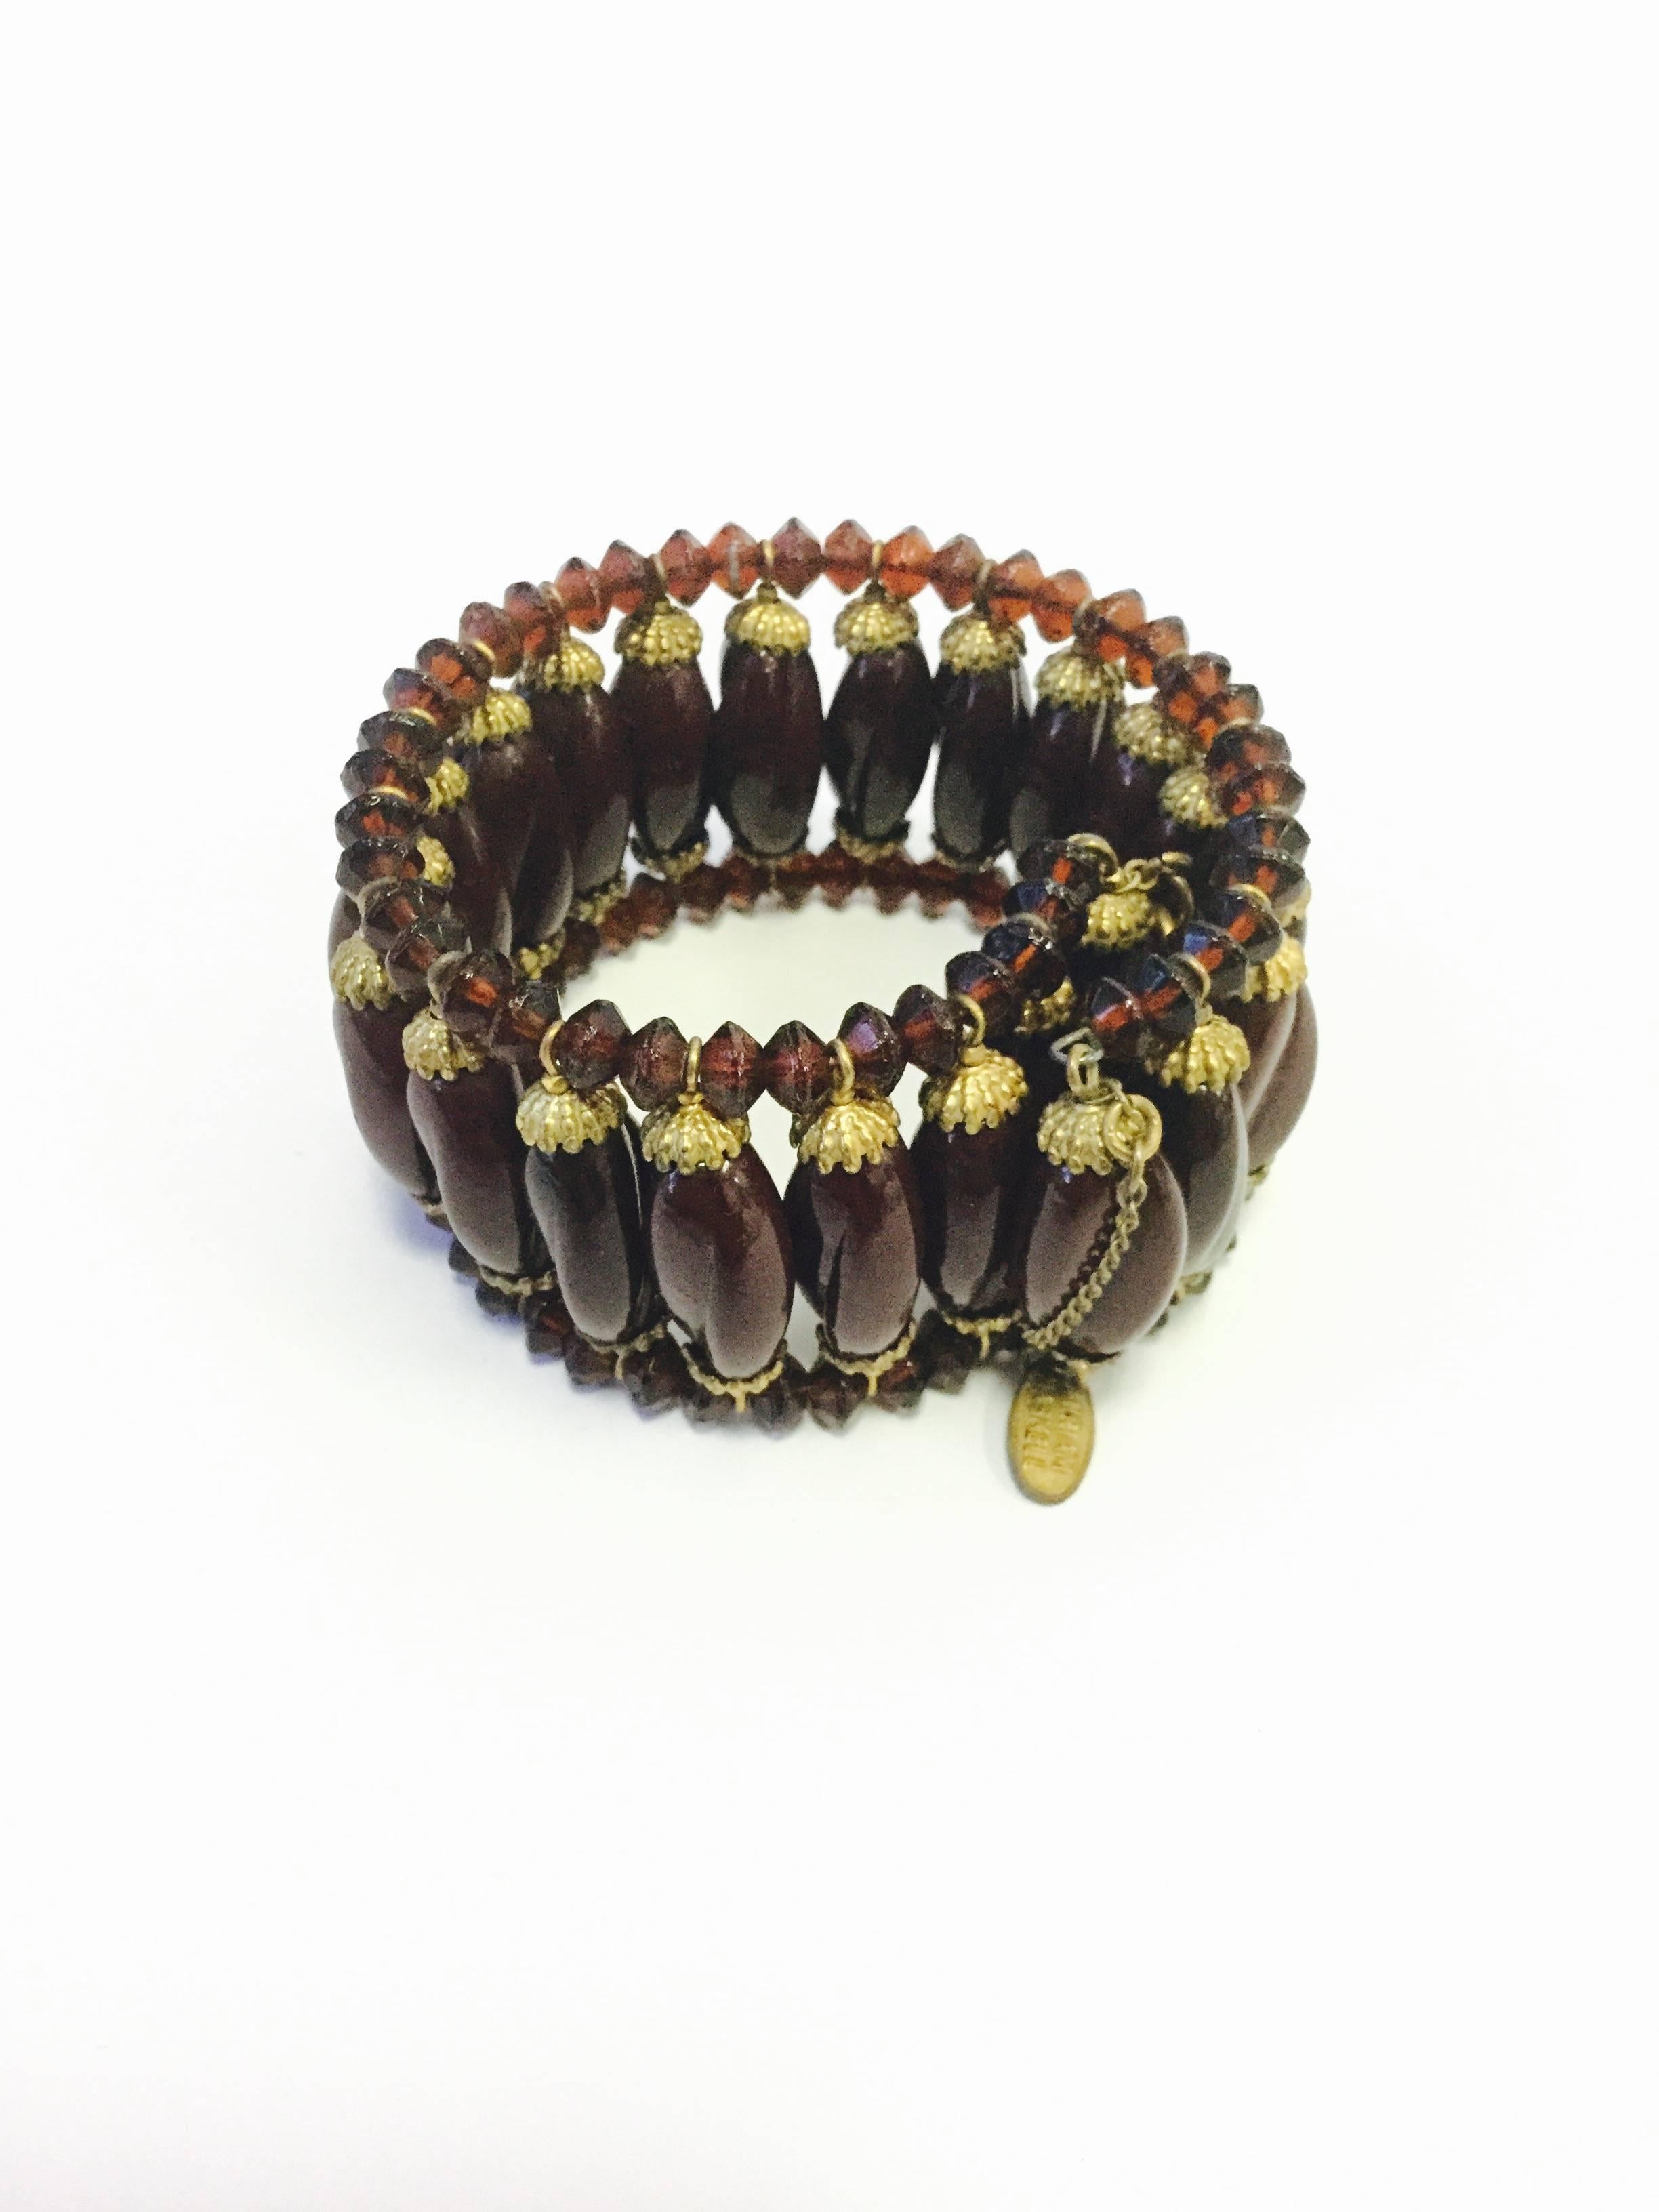 Fun and funky Miriam Haskell choker and bracelet duo! This matching necklace and bracelet are essentially made in the same manner. Both pieces consist of a swirled oval opaque maroon glass bead held in place by a floral clasp at the top and bottom,